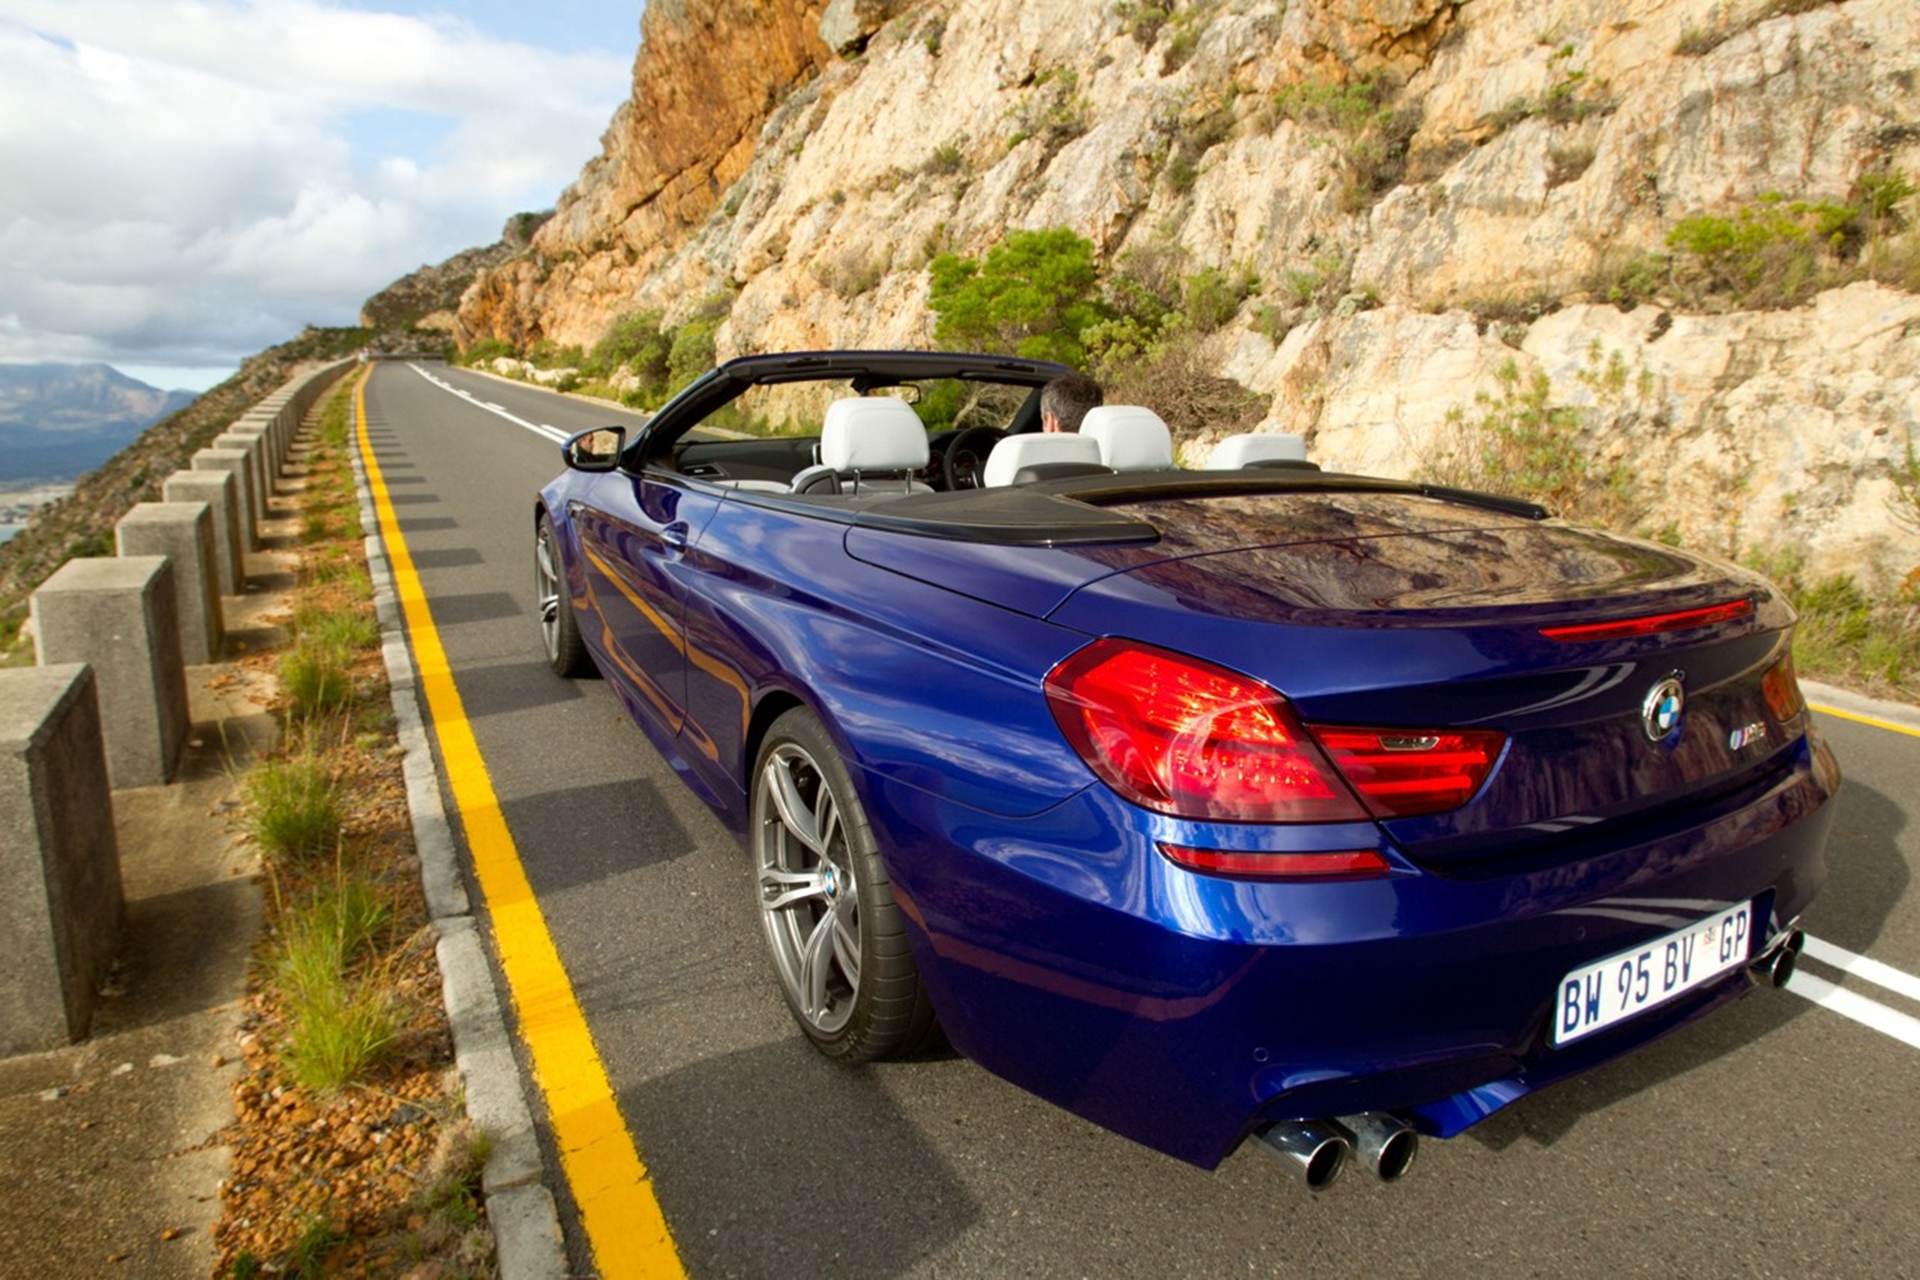 The new BMW M6 Convertible